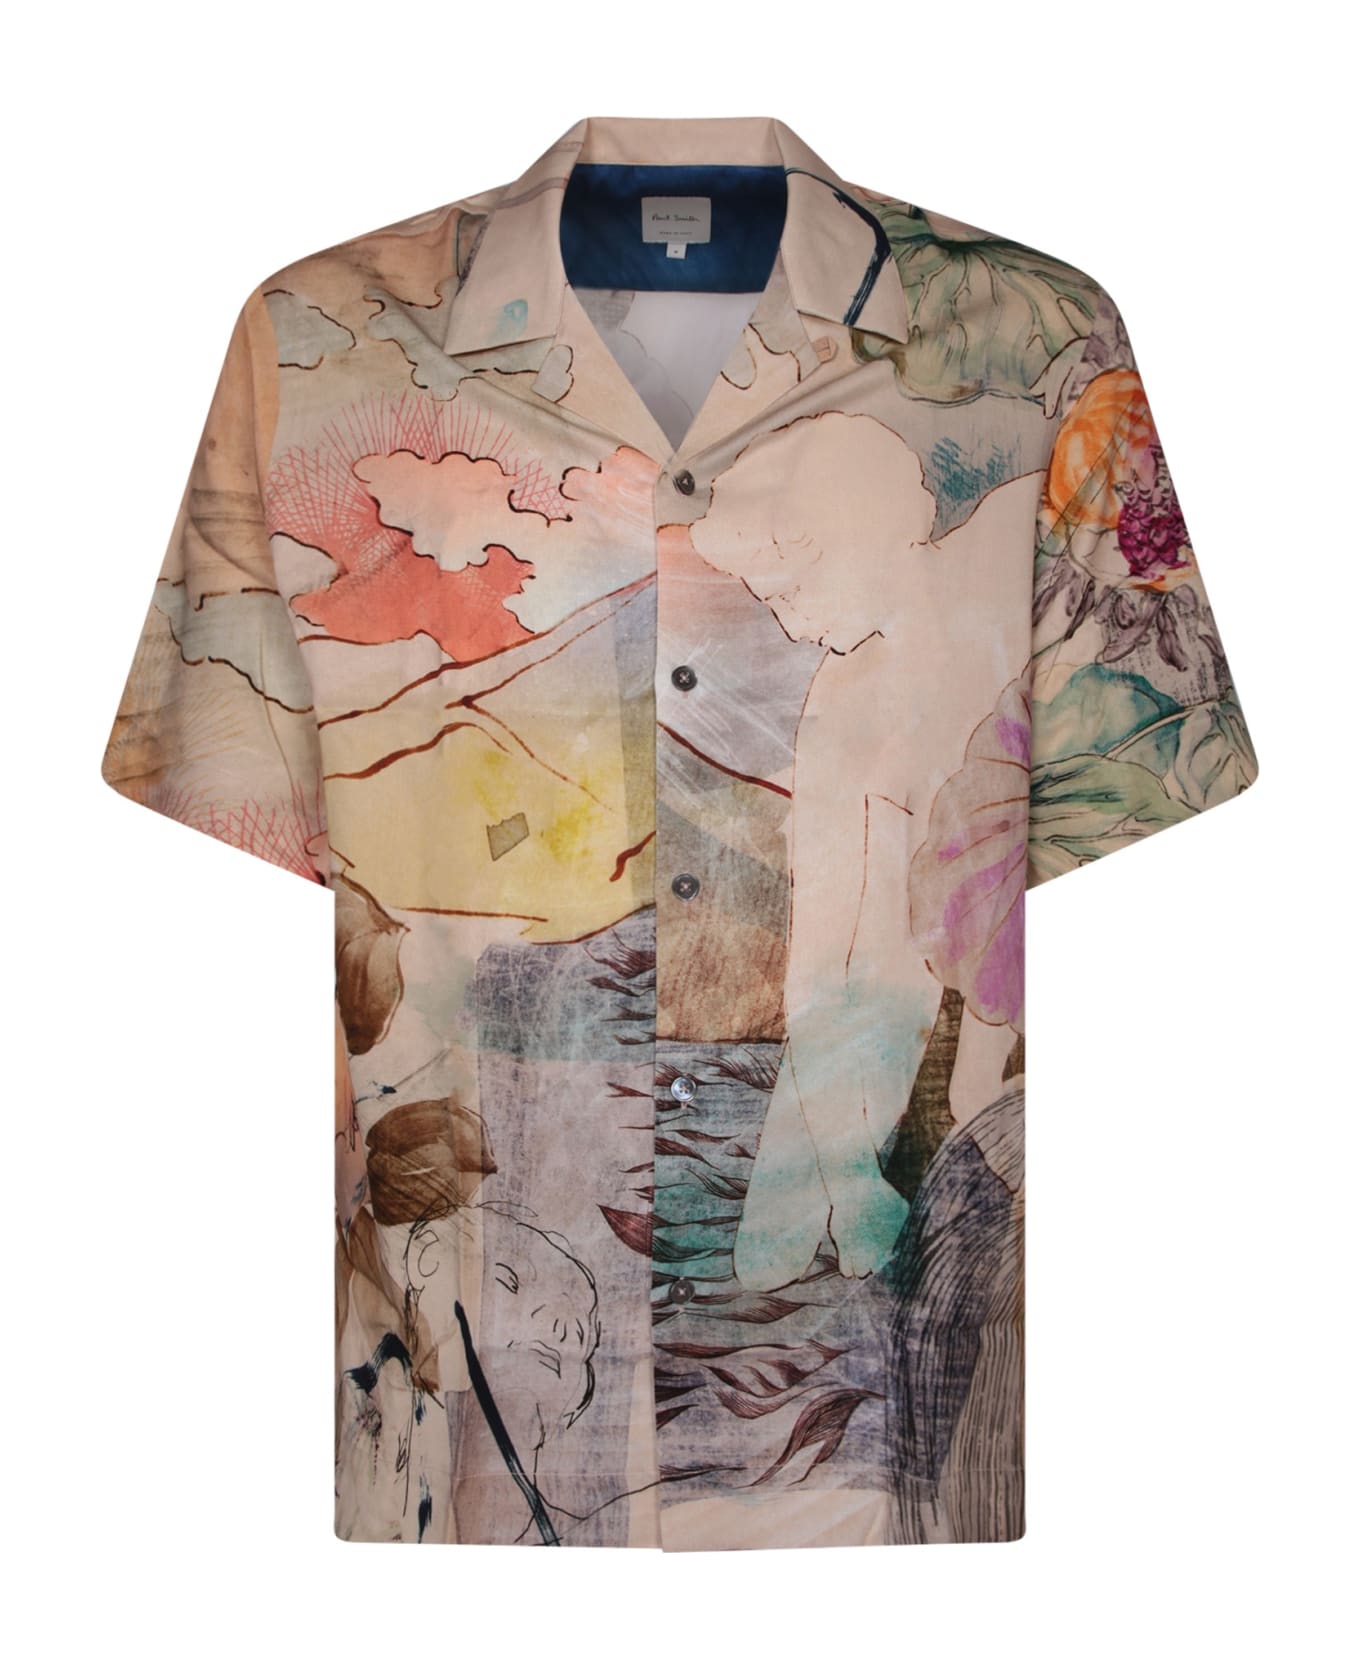 Paul Smith Graphic Printed Short-sleeved Shirt - Beige